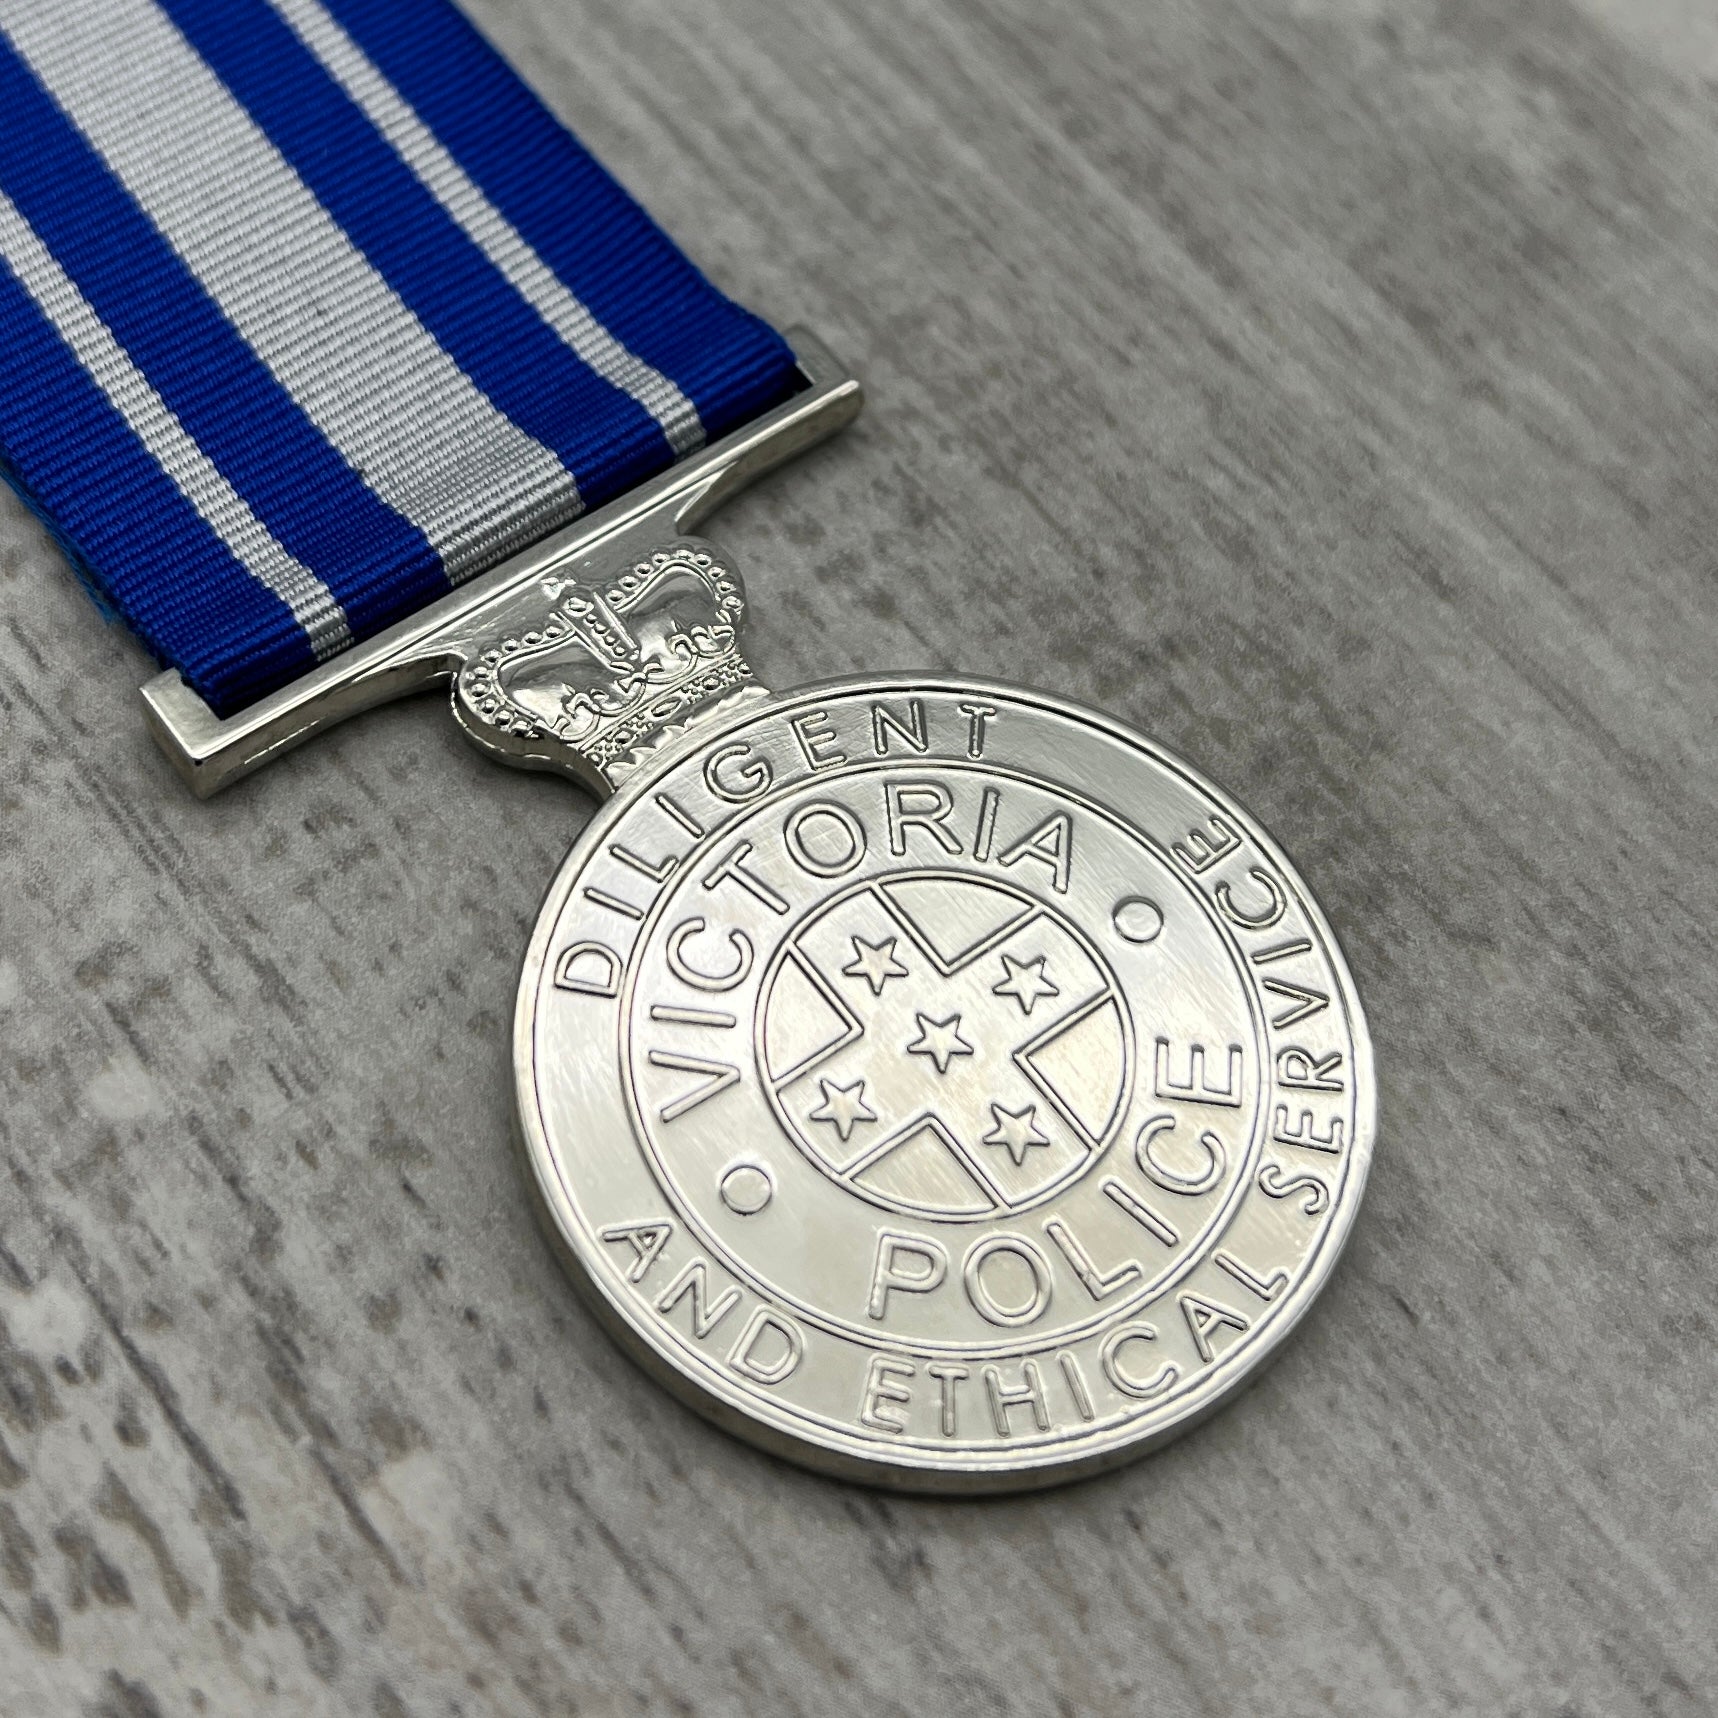 Victoria - Police Diligent & Ethical Service Medal - Foxhole Medals